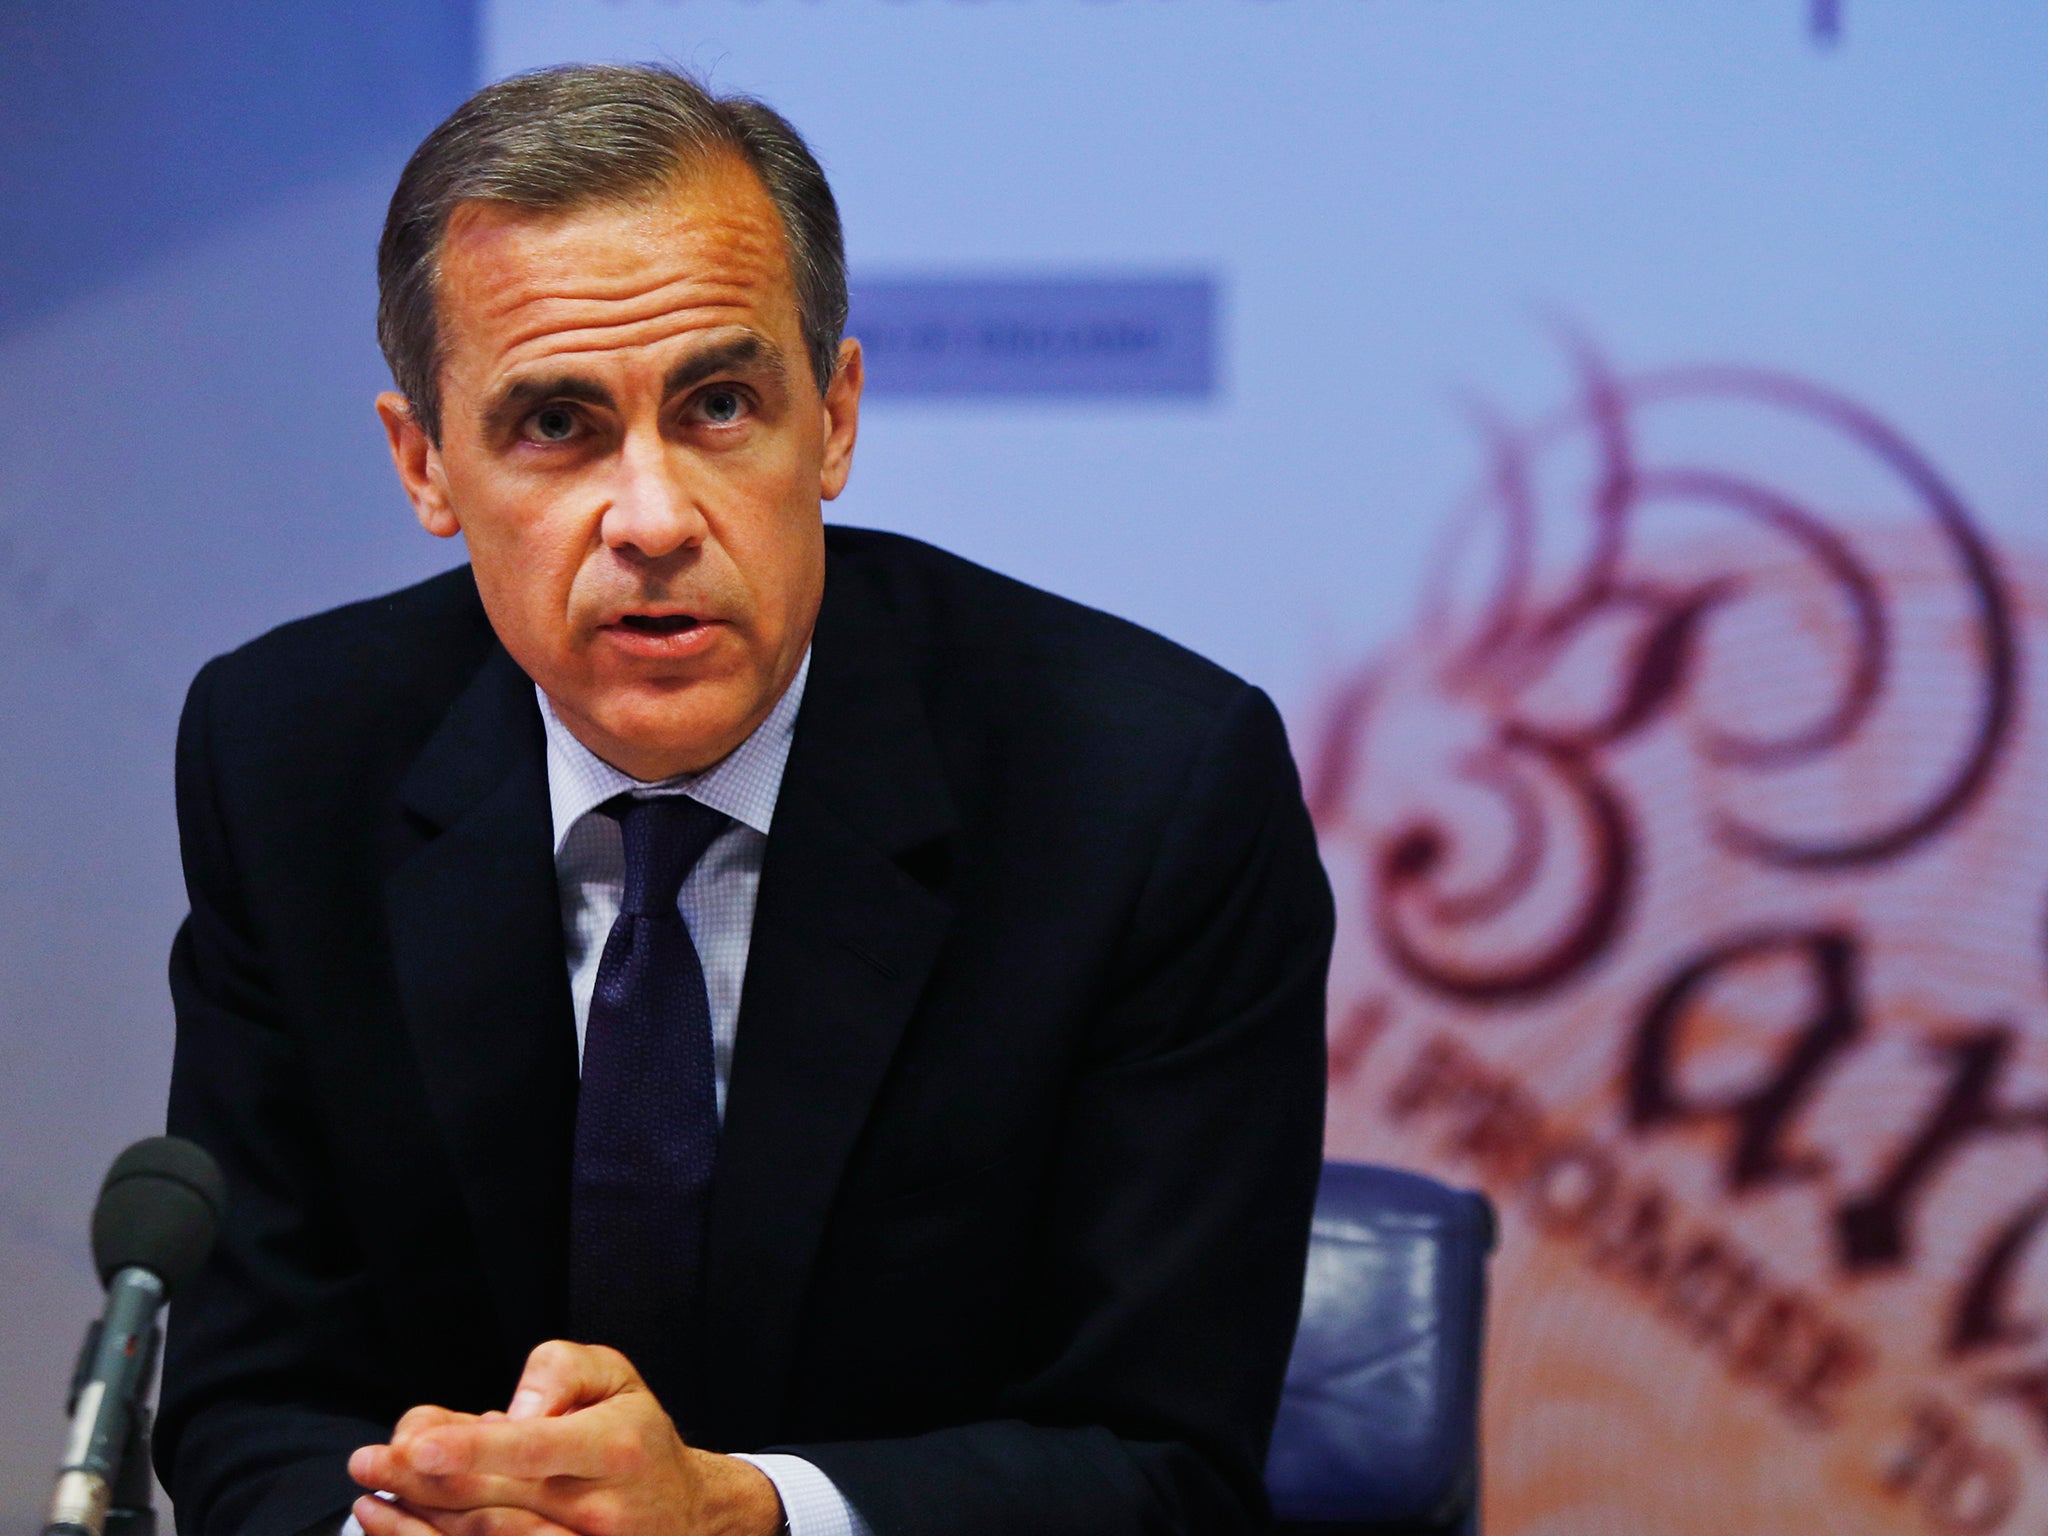 The Bank of England Governor Mark Carney says that an independent Scotland would need huge reserves if it tried to continue using sterling